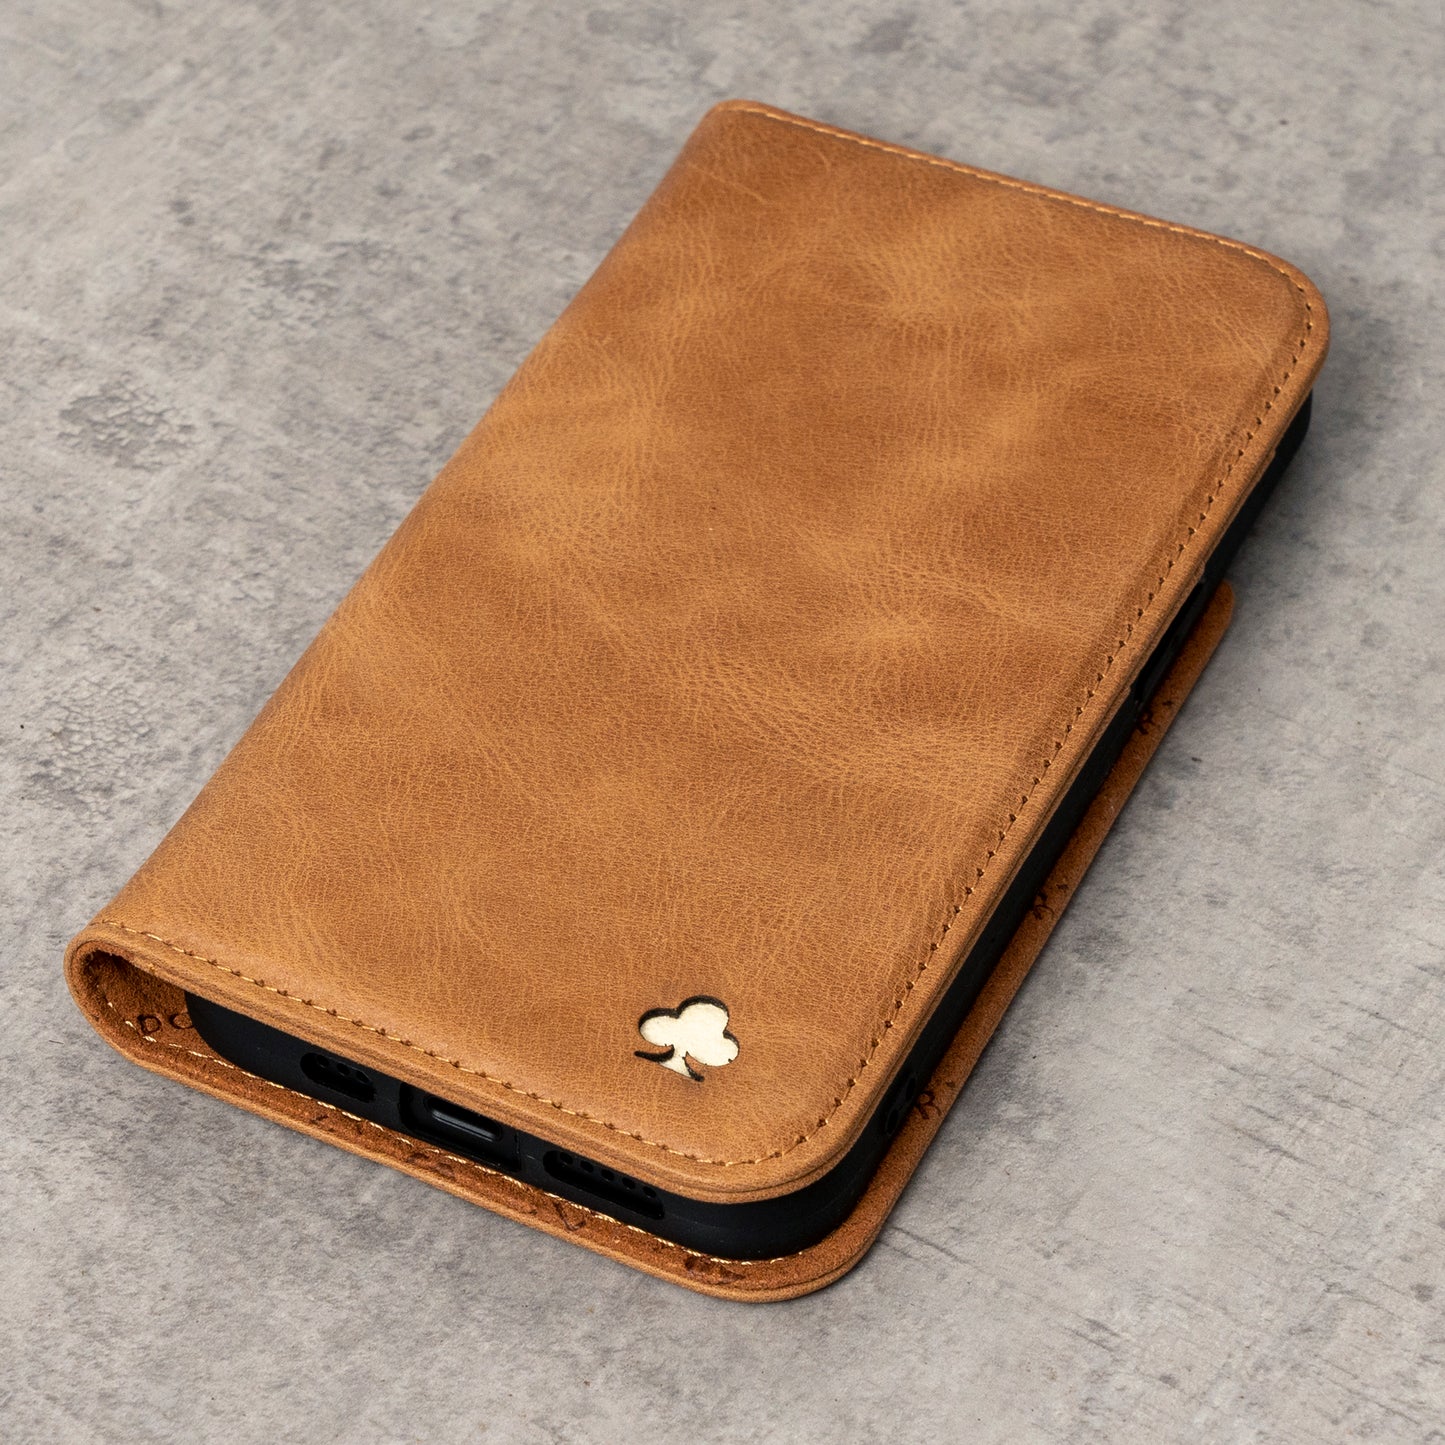 iPhone 13 Leather Case. Premium Slim Genuine Leather Stand Case/Cover/Wallet (Tan)